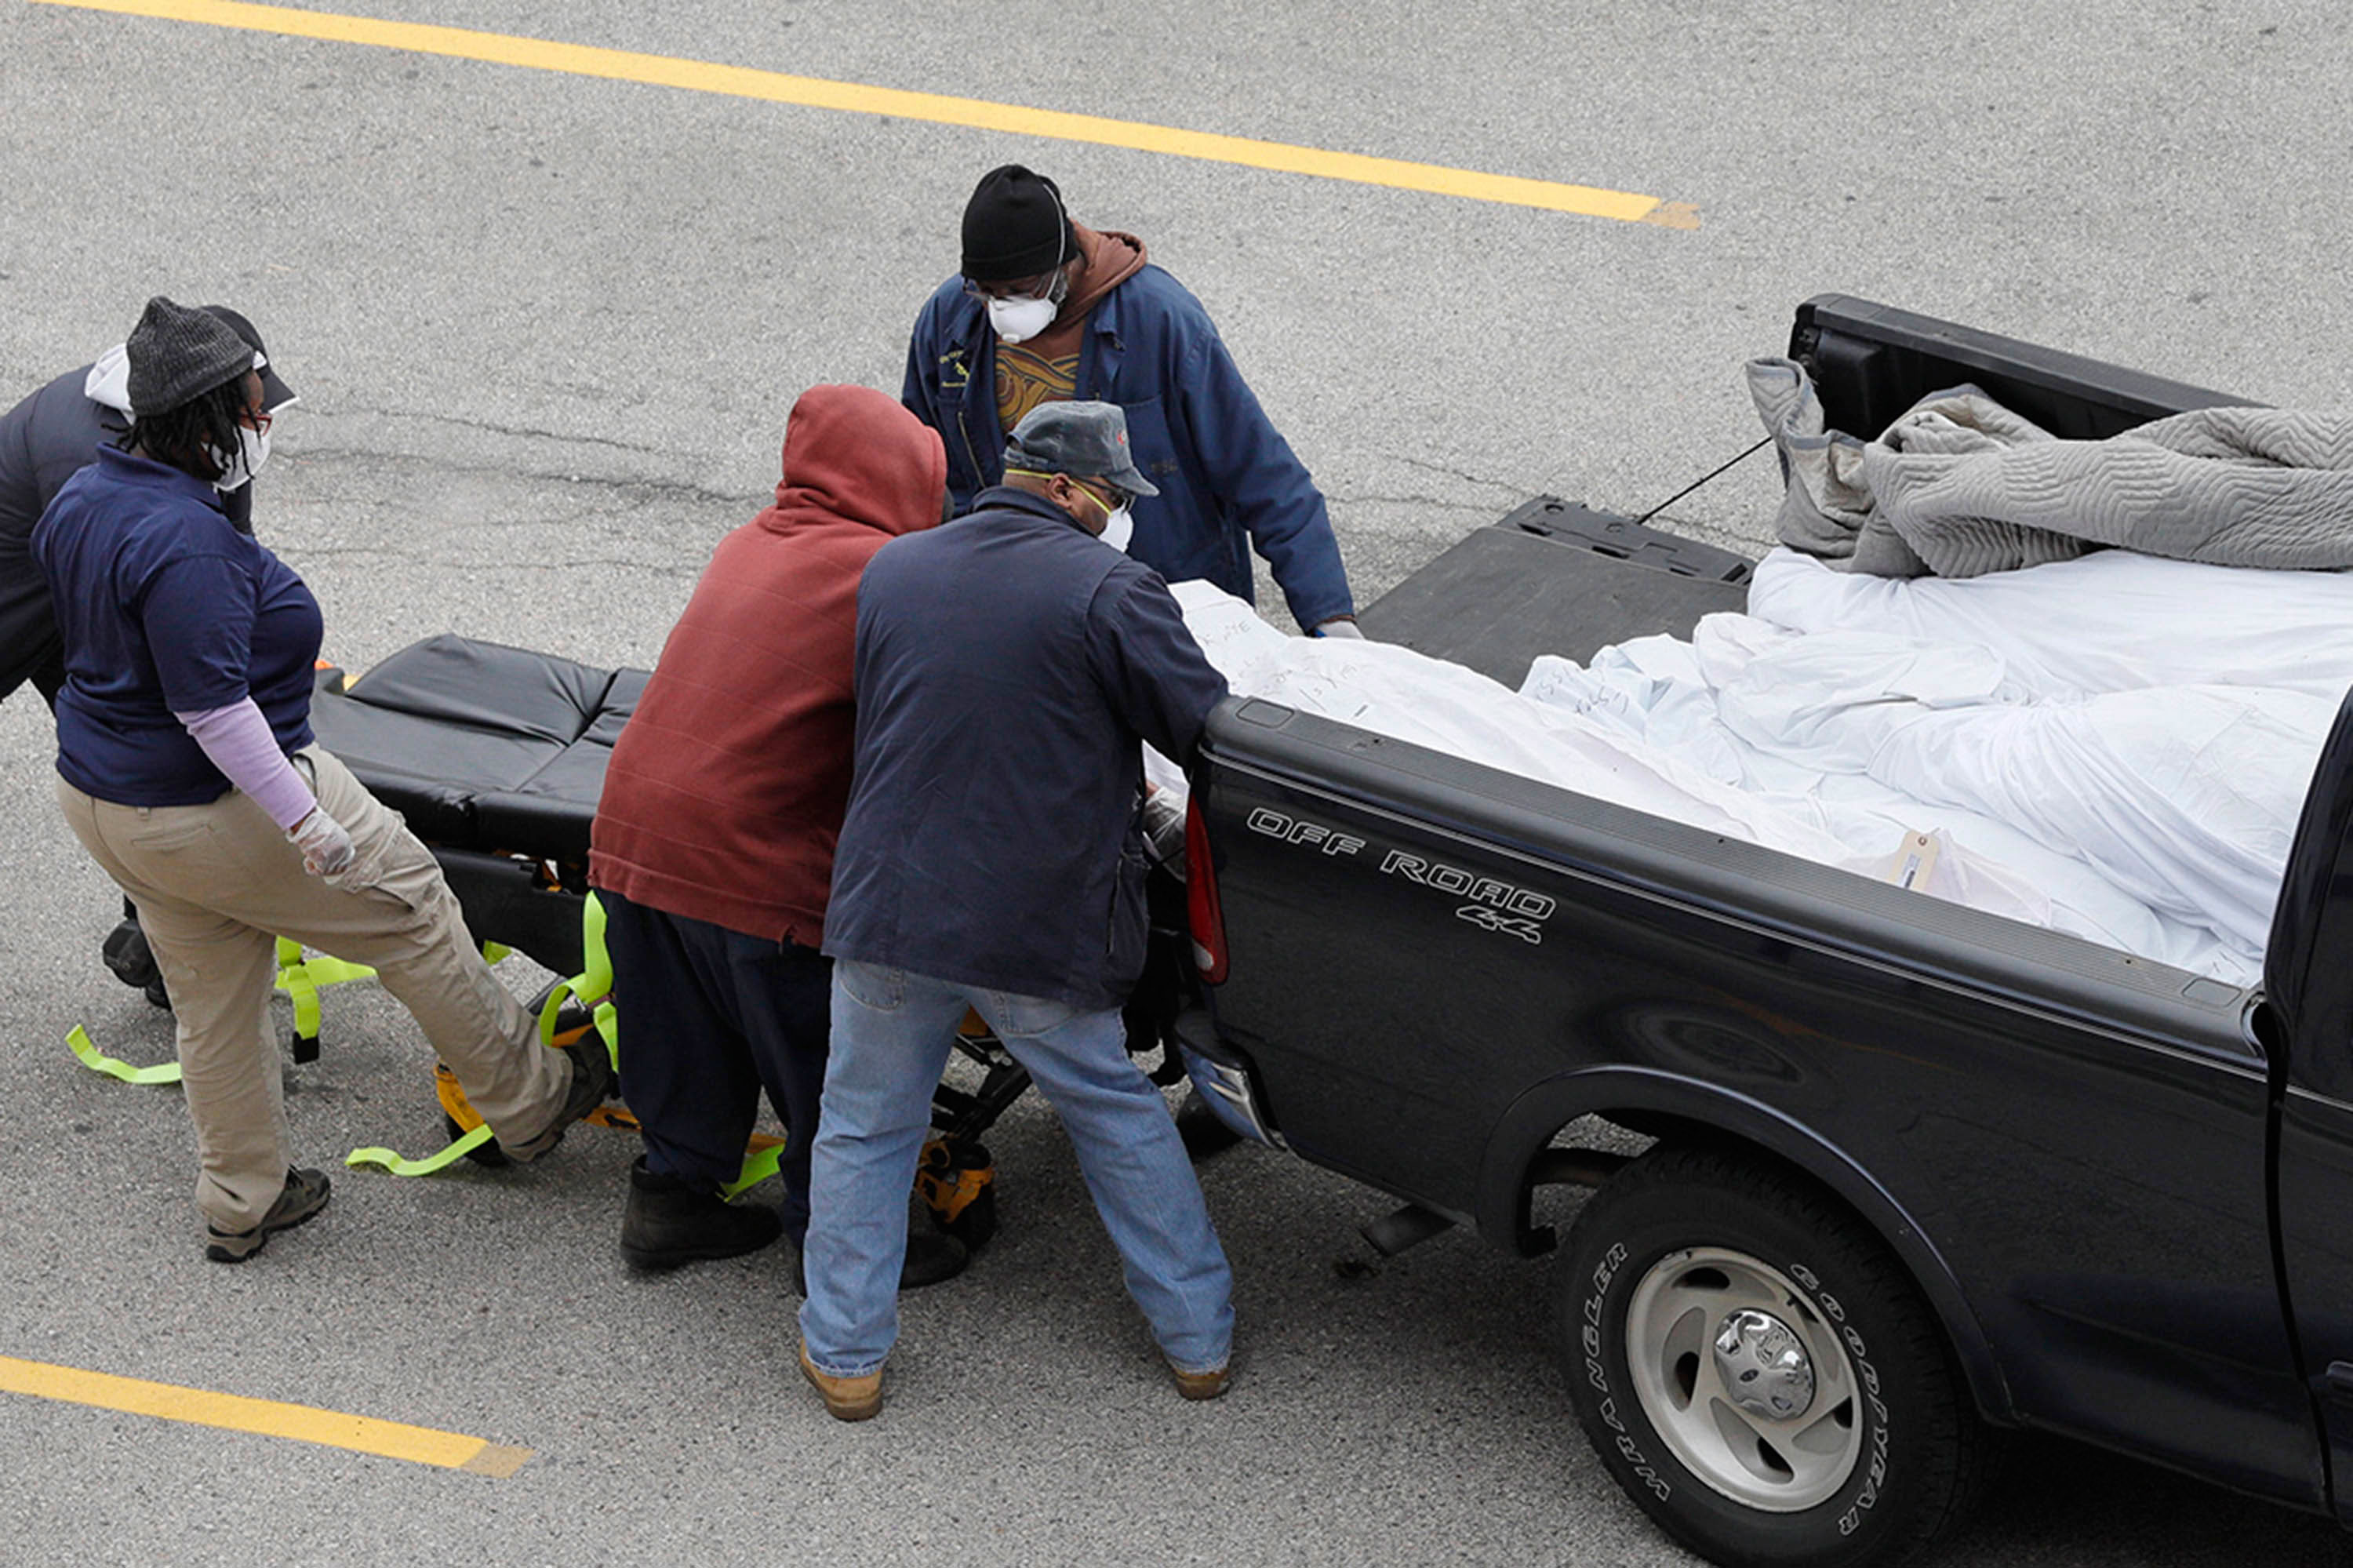 Workers move a body from the back of the truck onto a gurney, in an area near the Joseph W. Spellman Medical Examiner Building, in Philadelphia, on April 19.